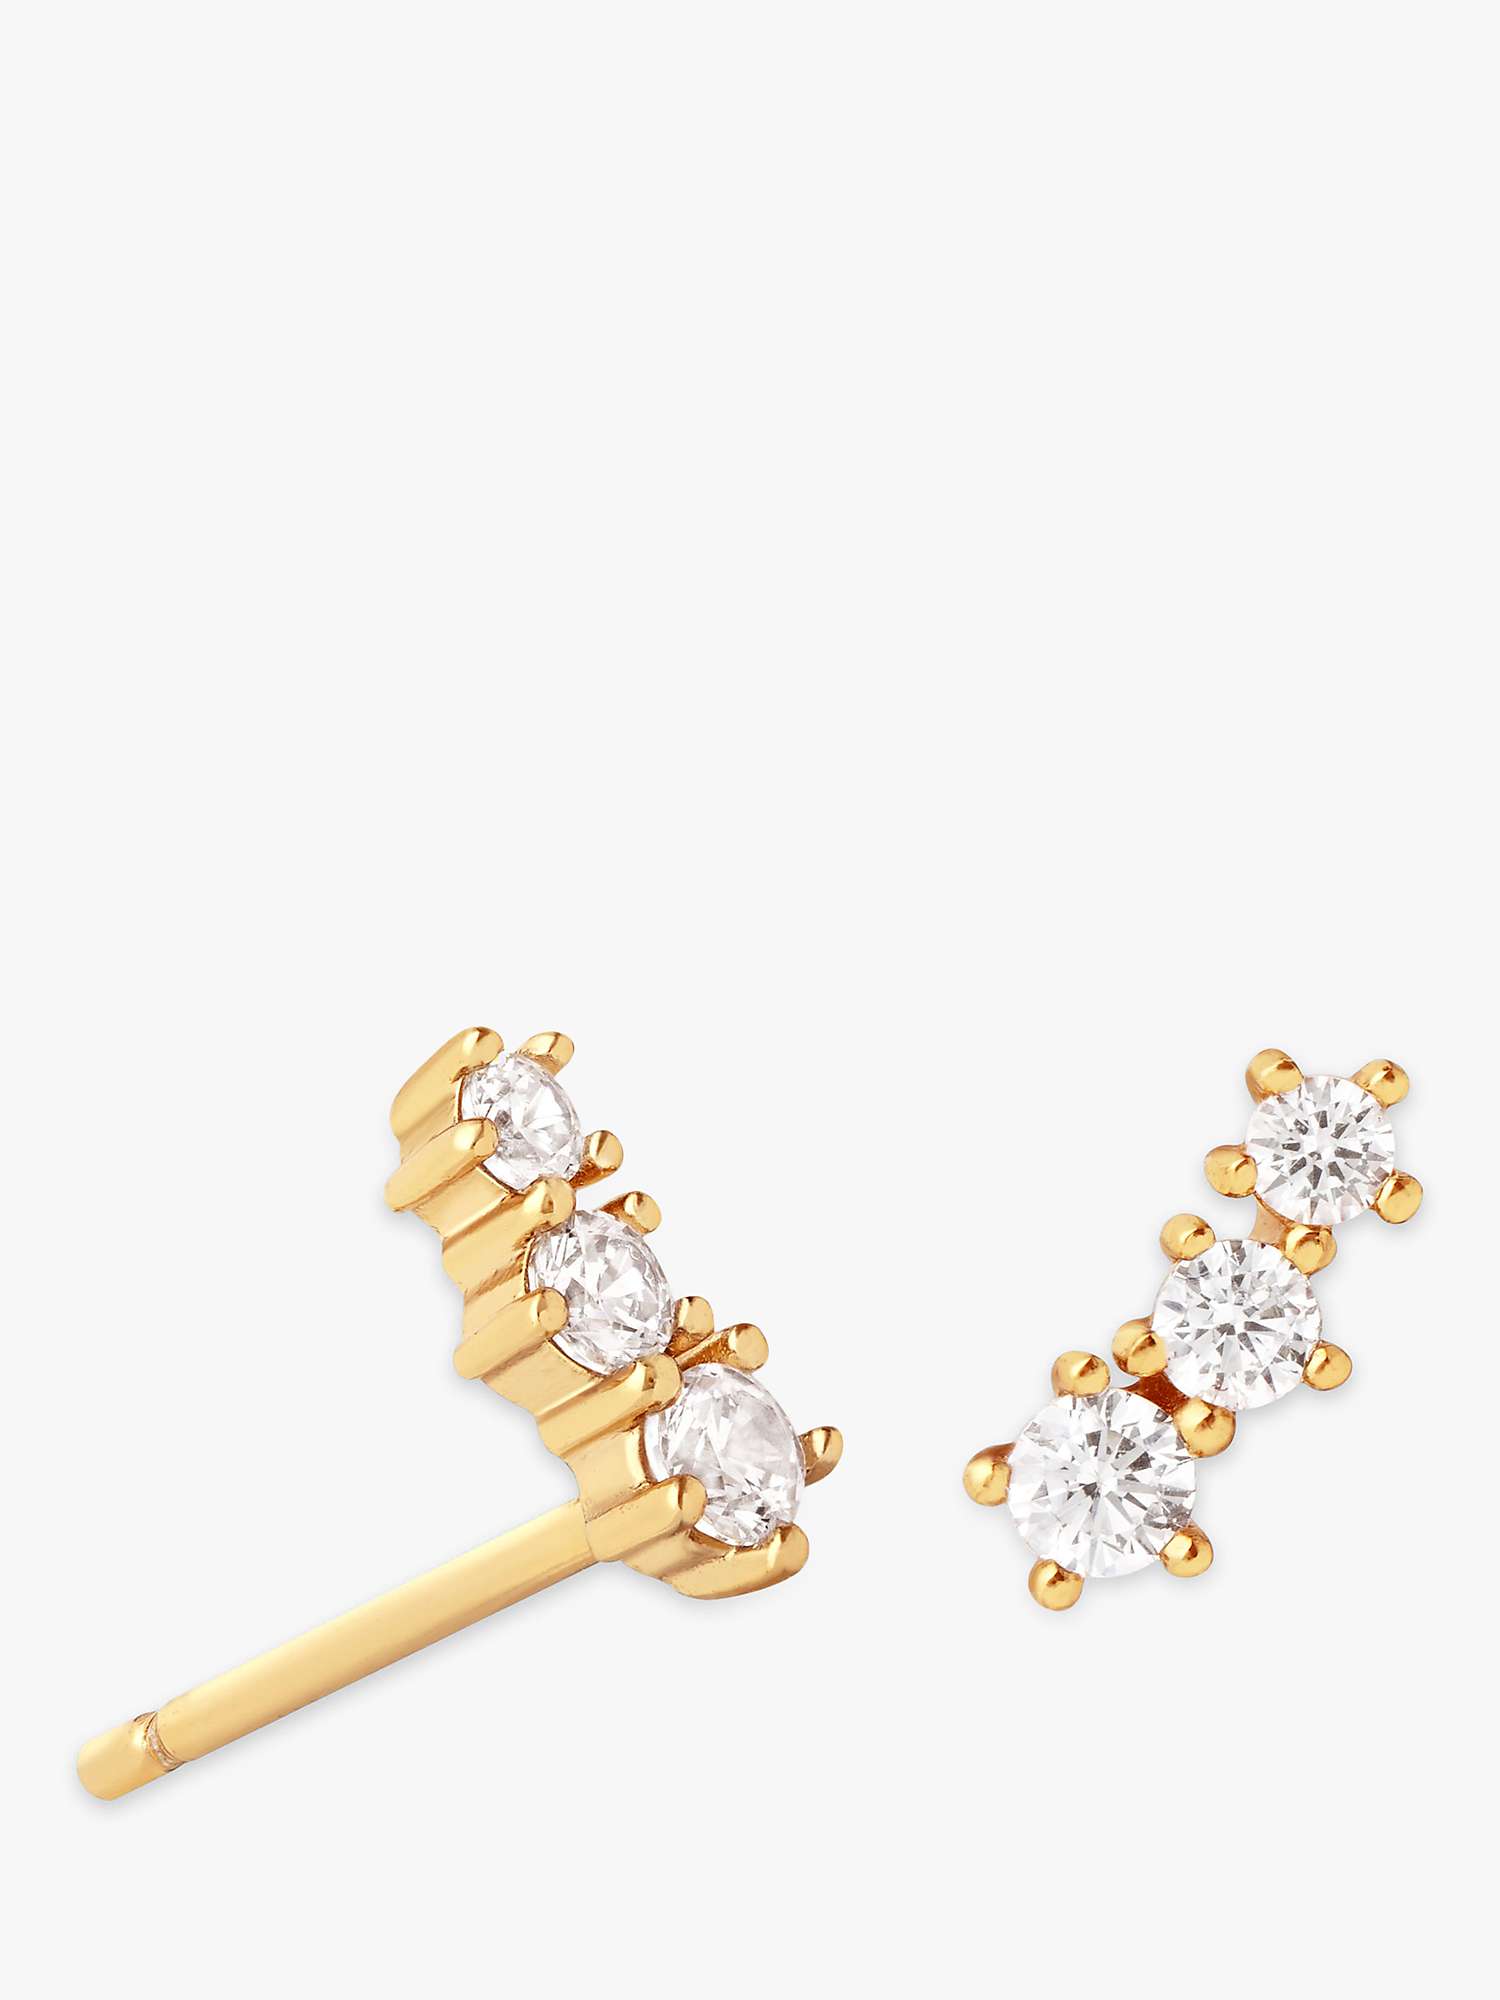 Buy Astrid & Miyu Glimmer Crystal Climber Stud Earrings, Gold Online at johnlewis.com